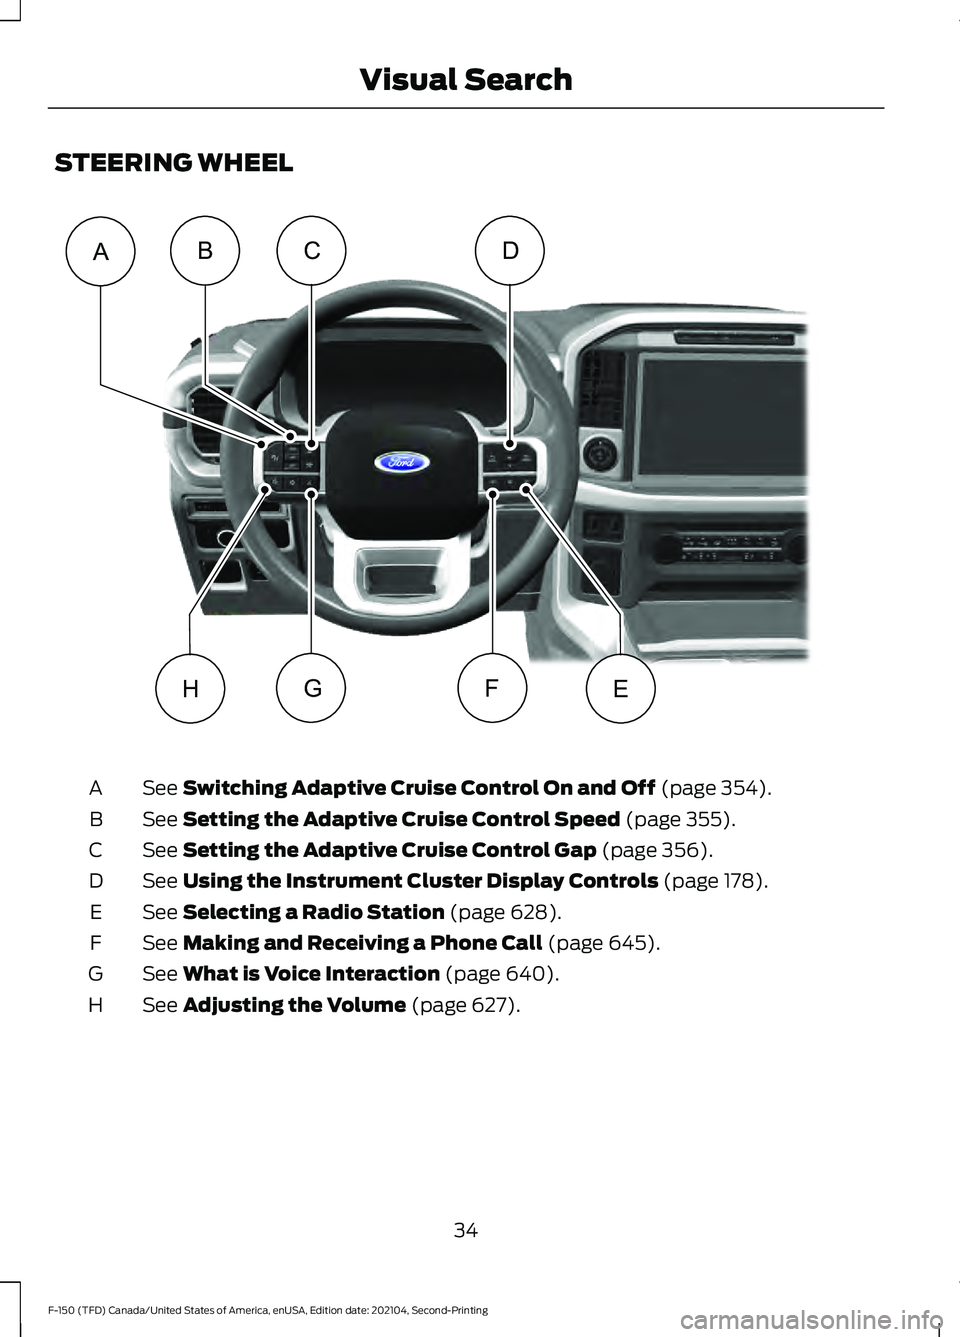 FORD F-150 2021  Owners Manual STEERING WHEEL
See Switching Adaptive Cruise Control On and Off (page 354).
A
See 
Setting the Adaptive Cruise Control Speed (page 355).
B
See 
Setting the Adaptive Cruise Control Gap (page 356).
C
Se